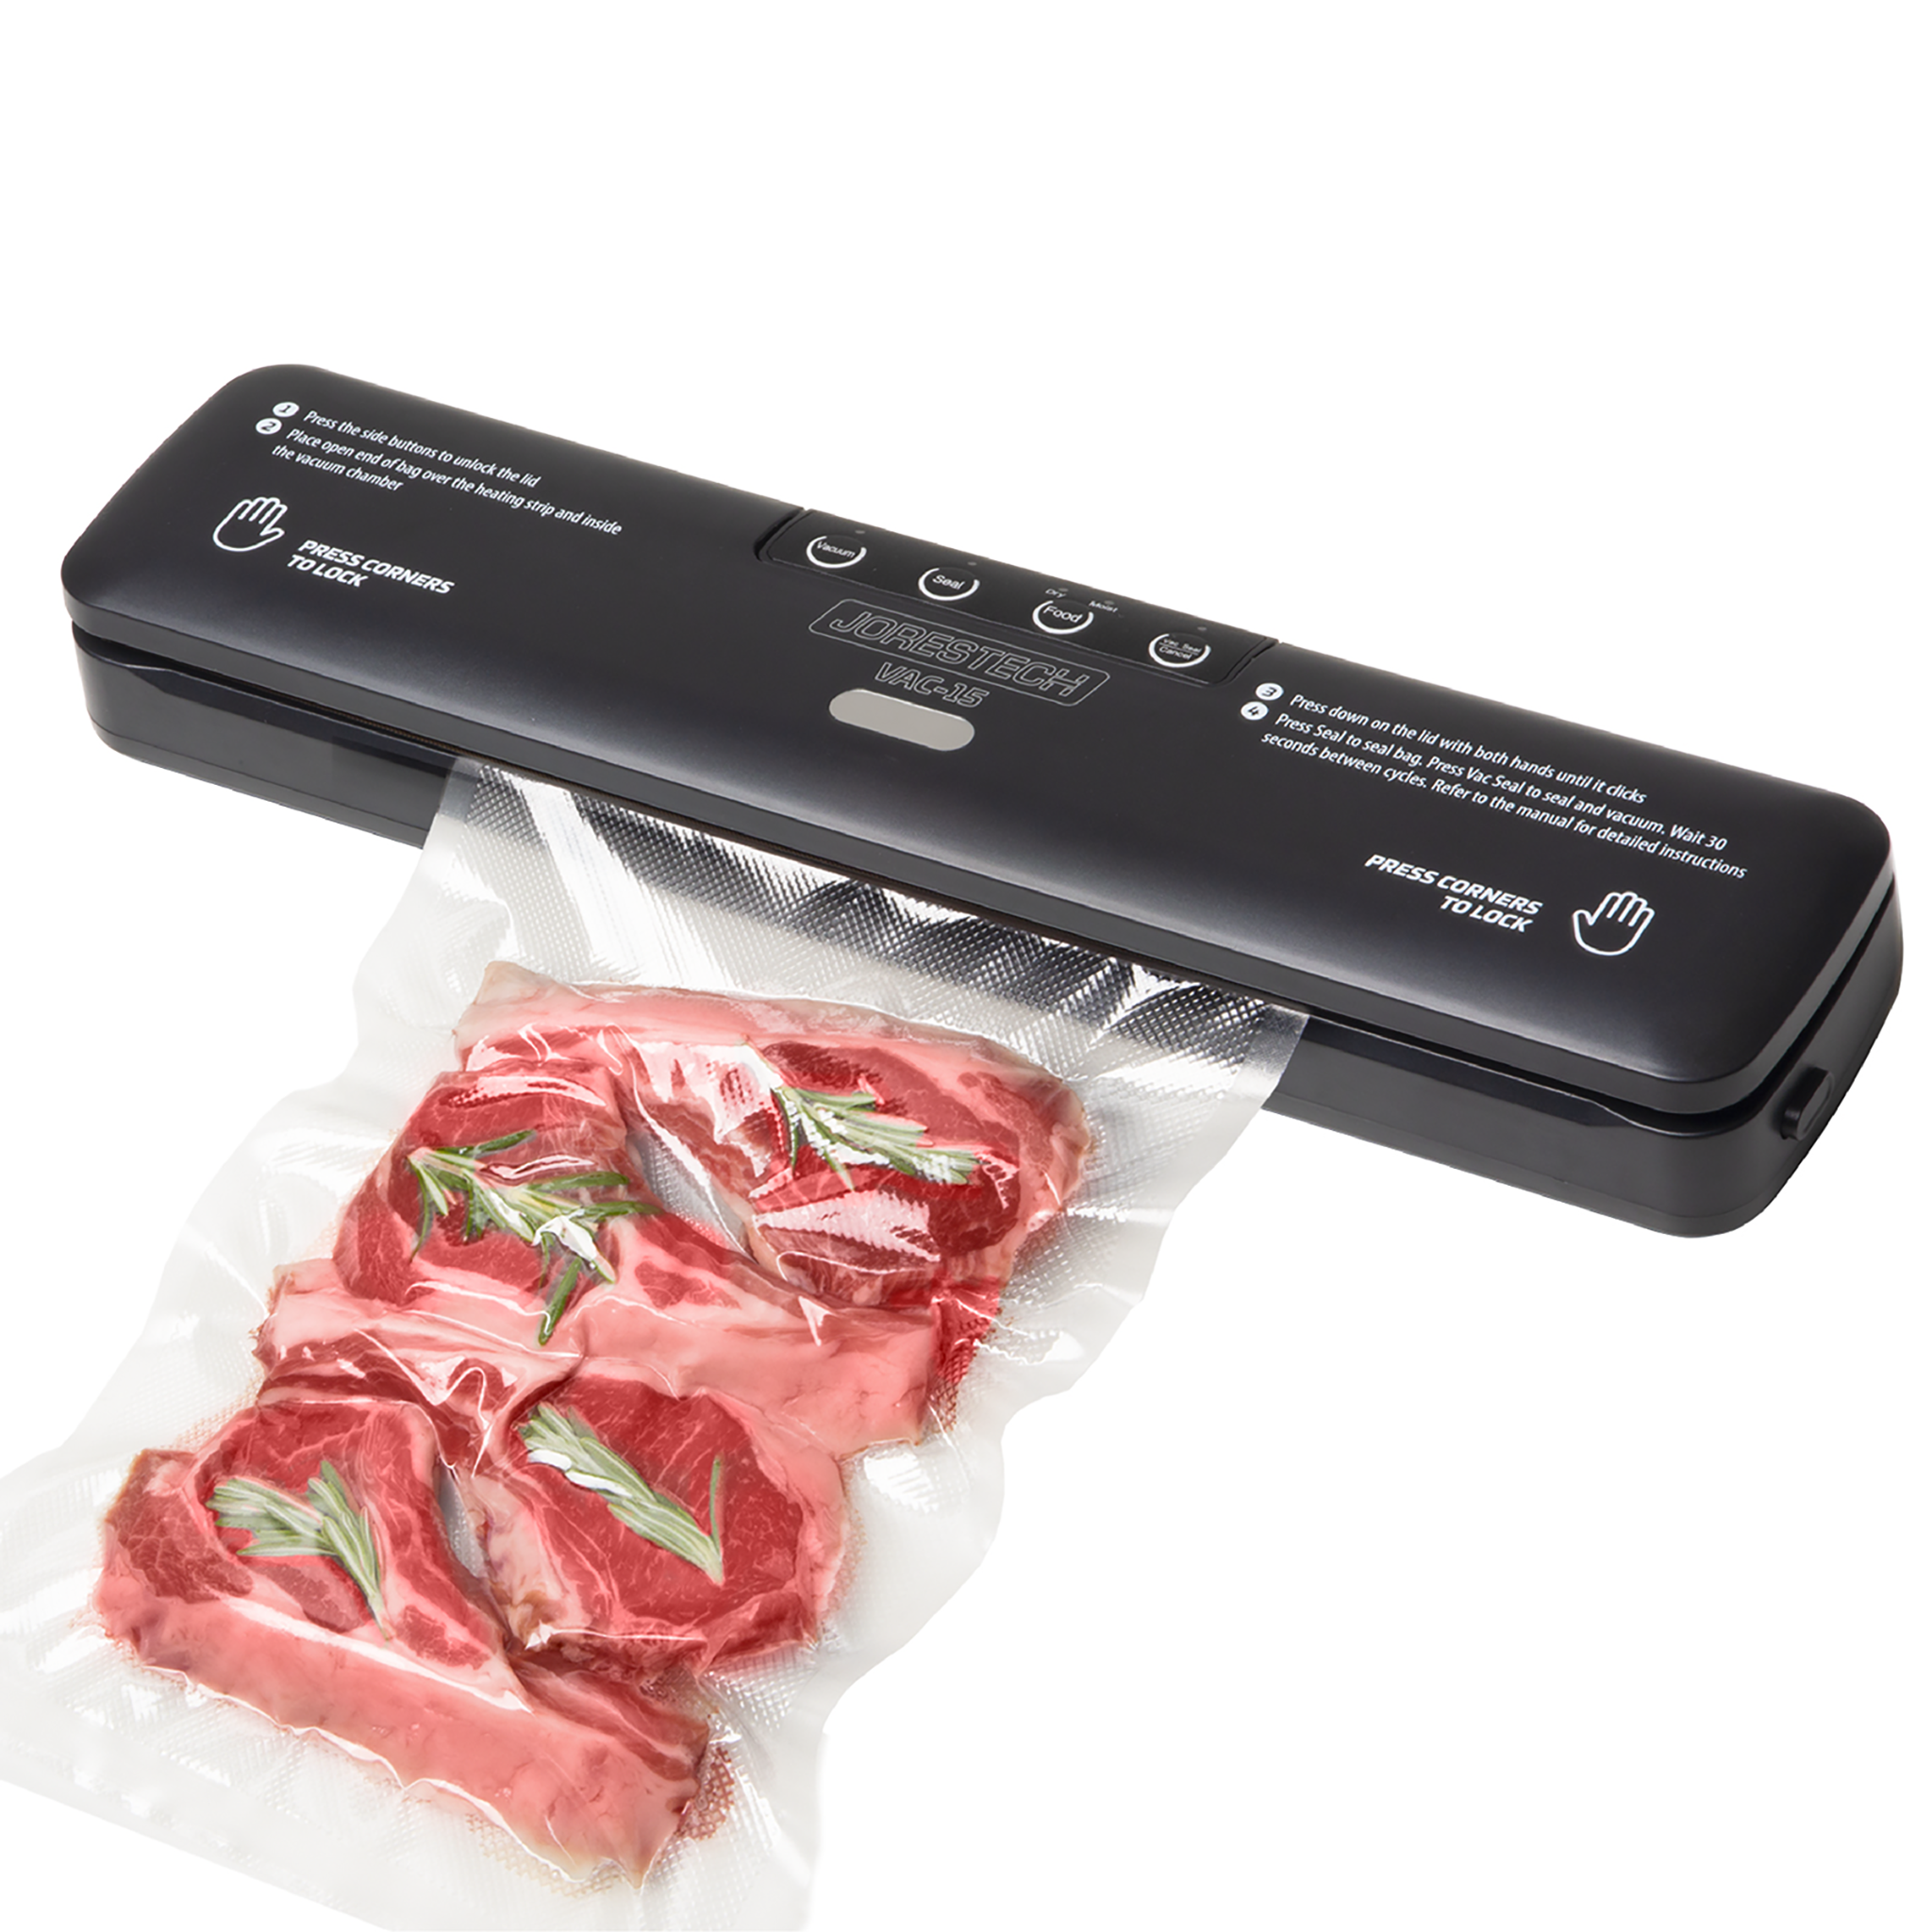 Domccy® Stainless Steel Vacuum Sealer Machine for Dry Wet Meat